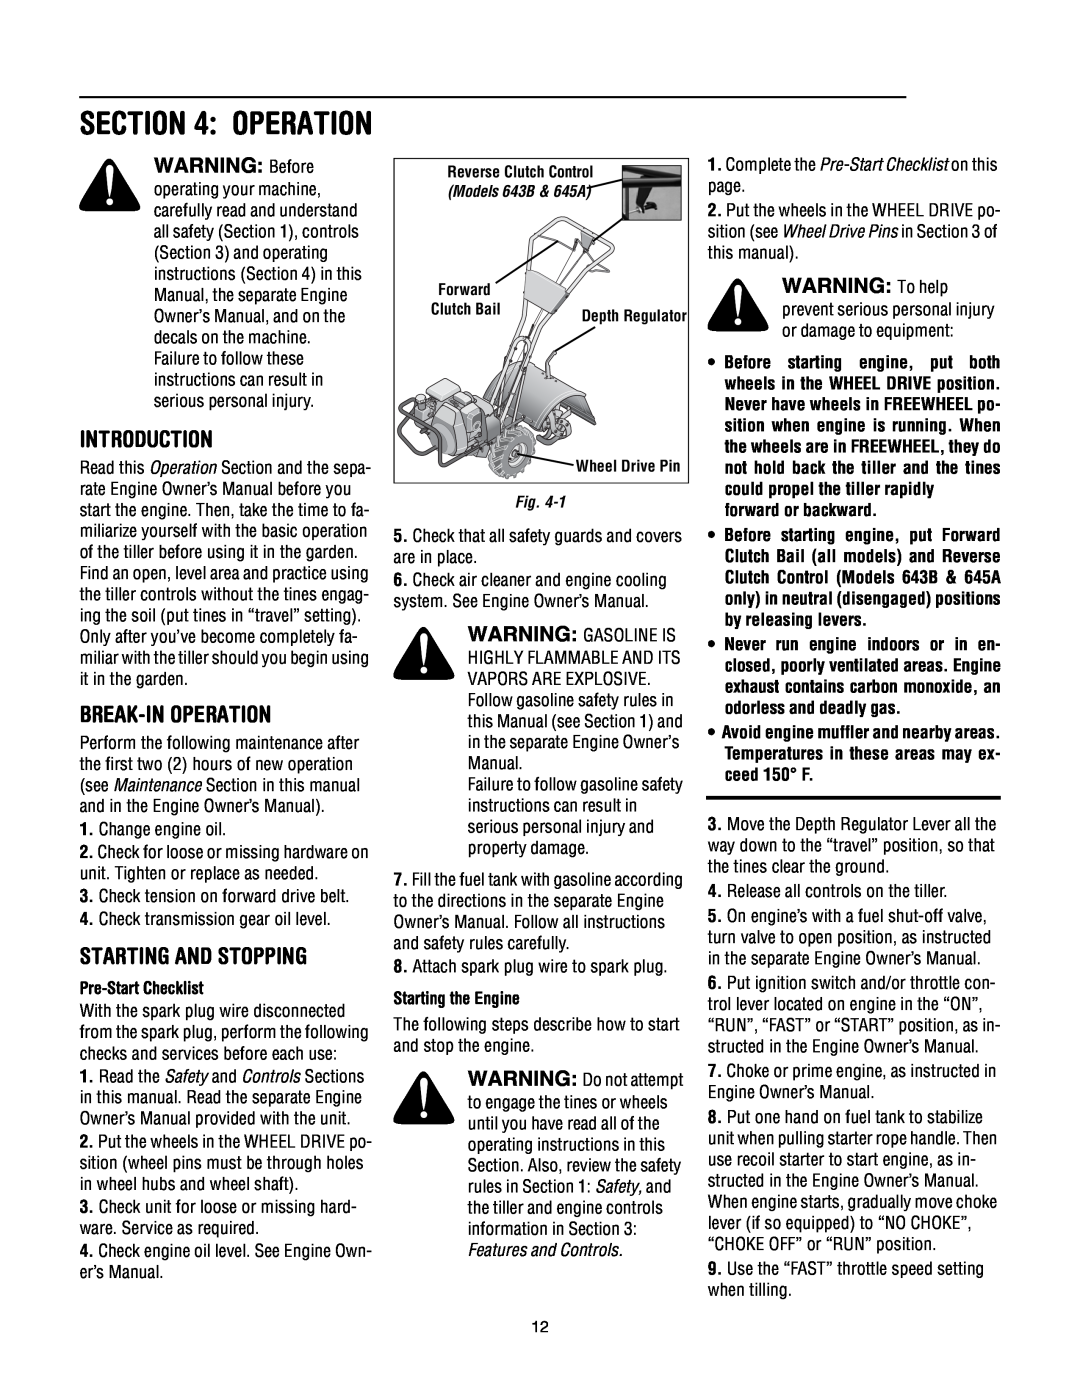 Troy-Bilt 645A Super Bronco manual Break-Inoperation, Starting And Stopping, WARNING To help, Operation, Introduction 